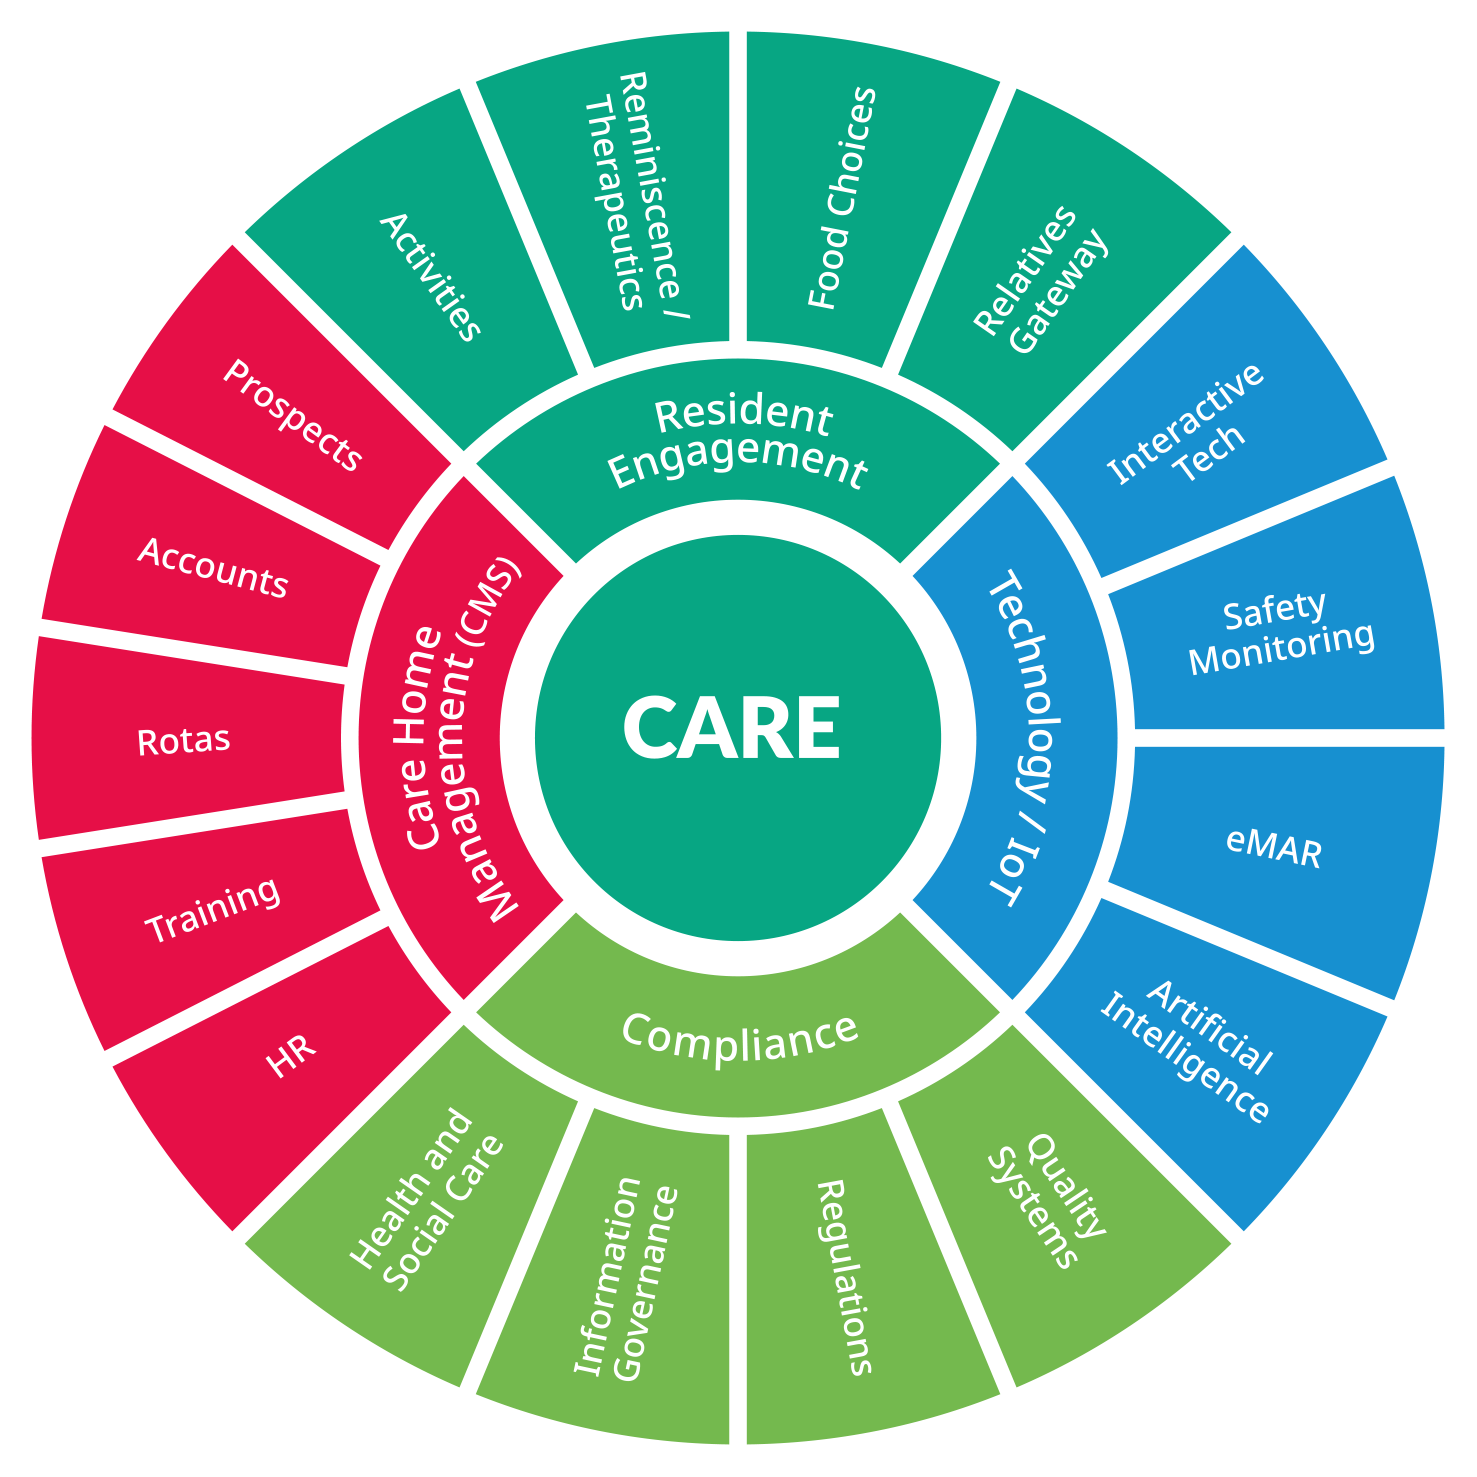 person-centred-software-ecosystem-of-care